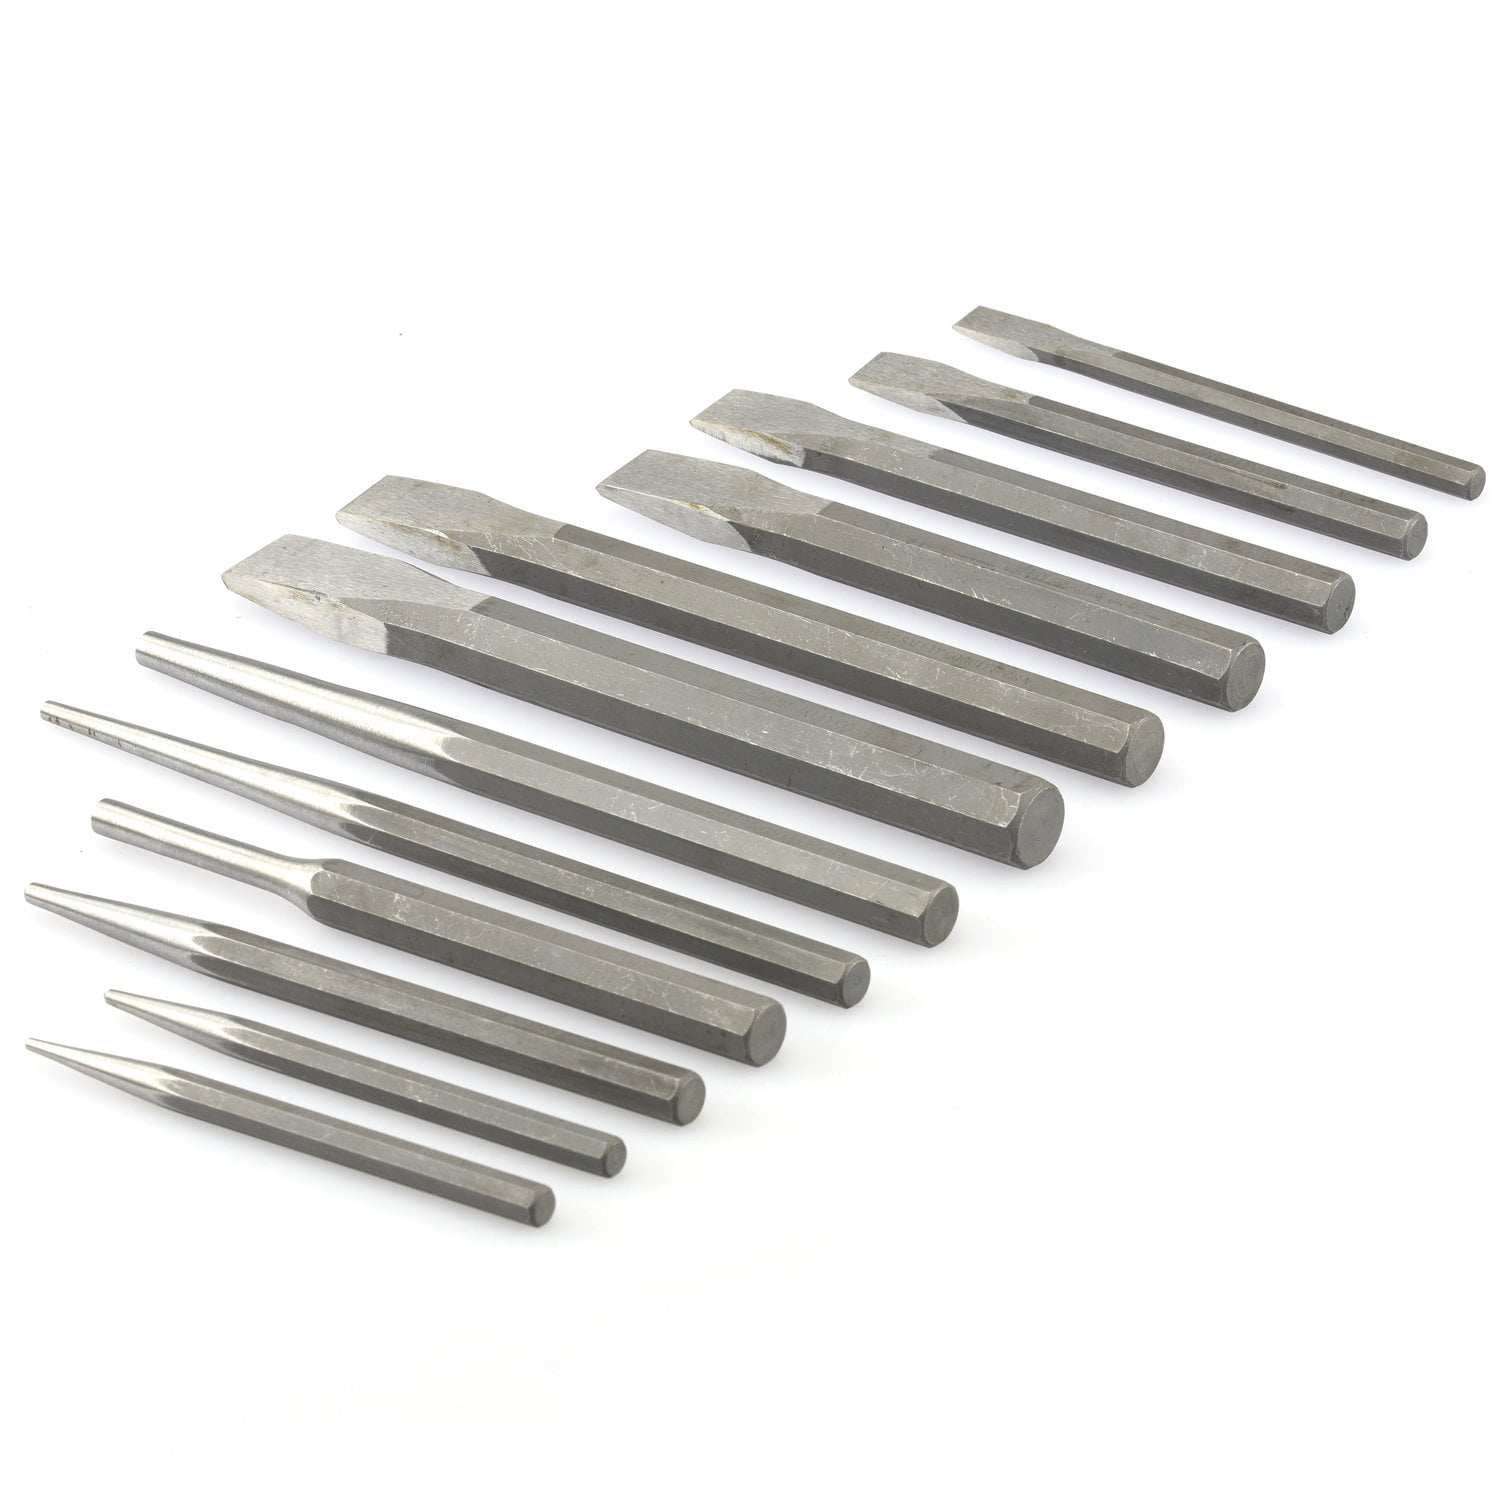 NEIKO 02623A 12 Piece Heavy Duty Punch  Chisel Set Cold Taper Center Pin 